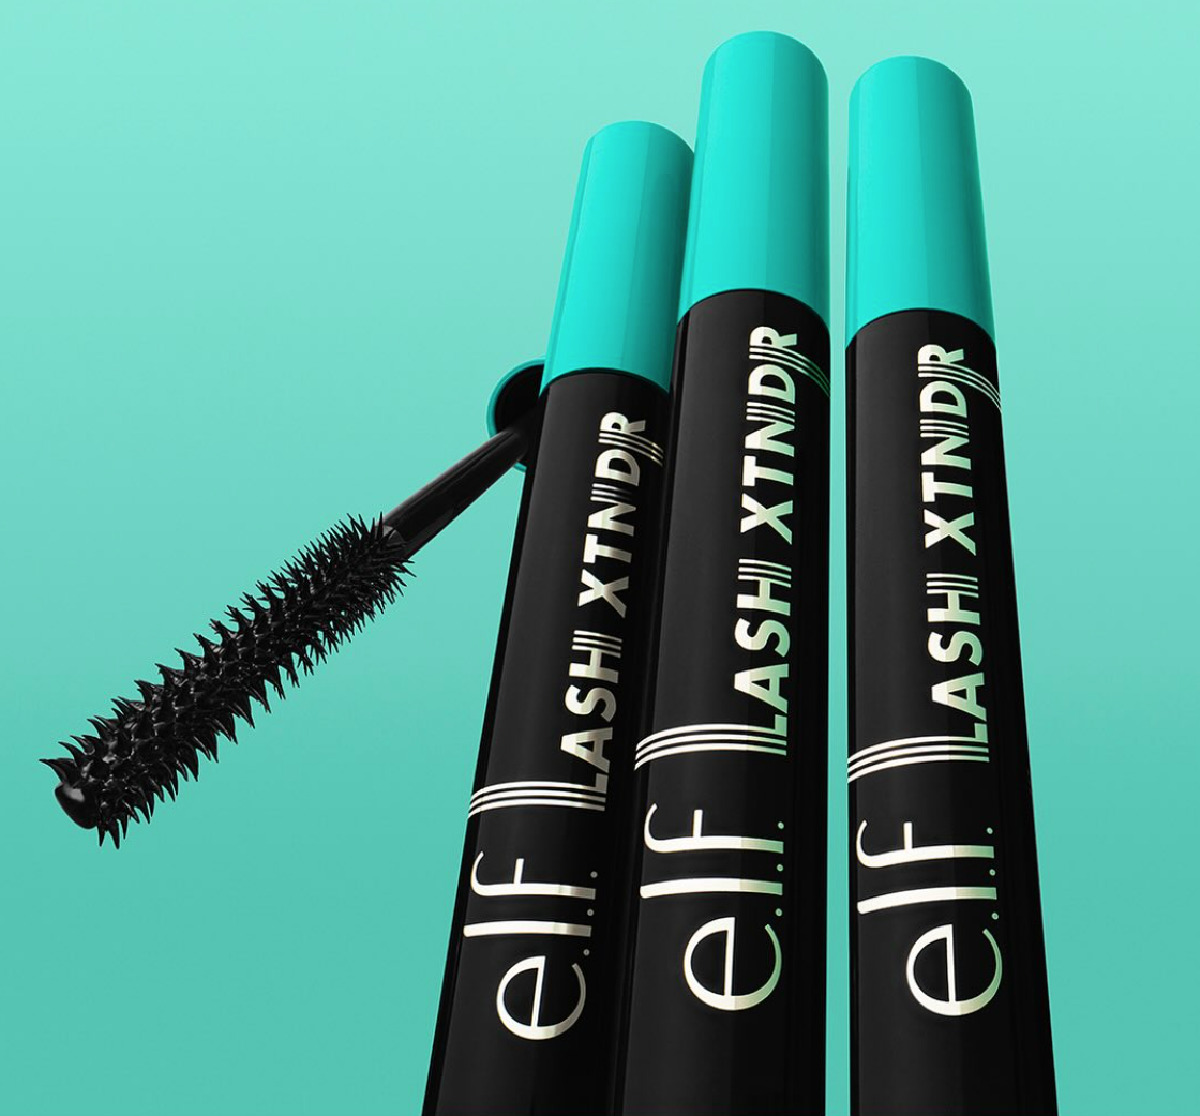 Three black ELF mascaras with turquoise lids on a turquoise background next to a black mascara wand. 